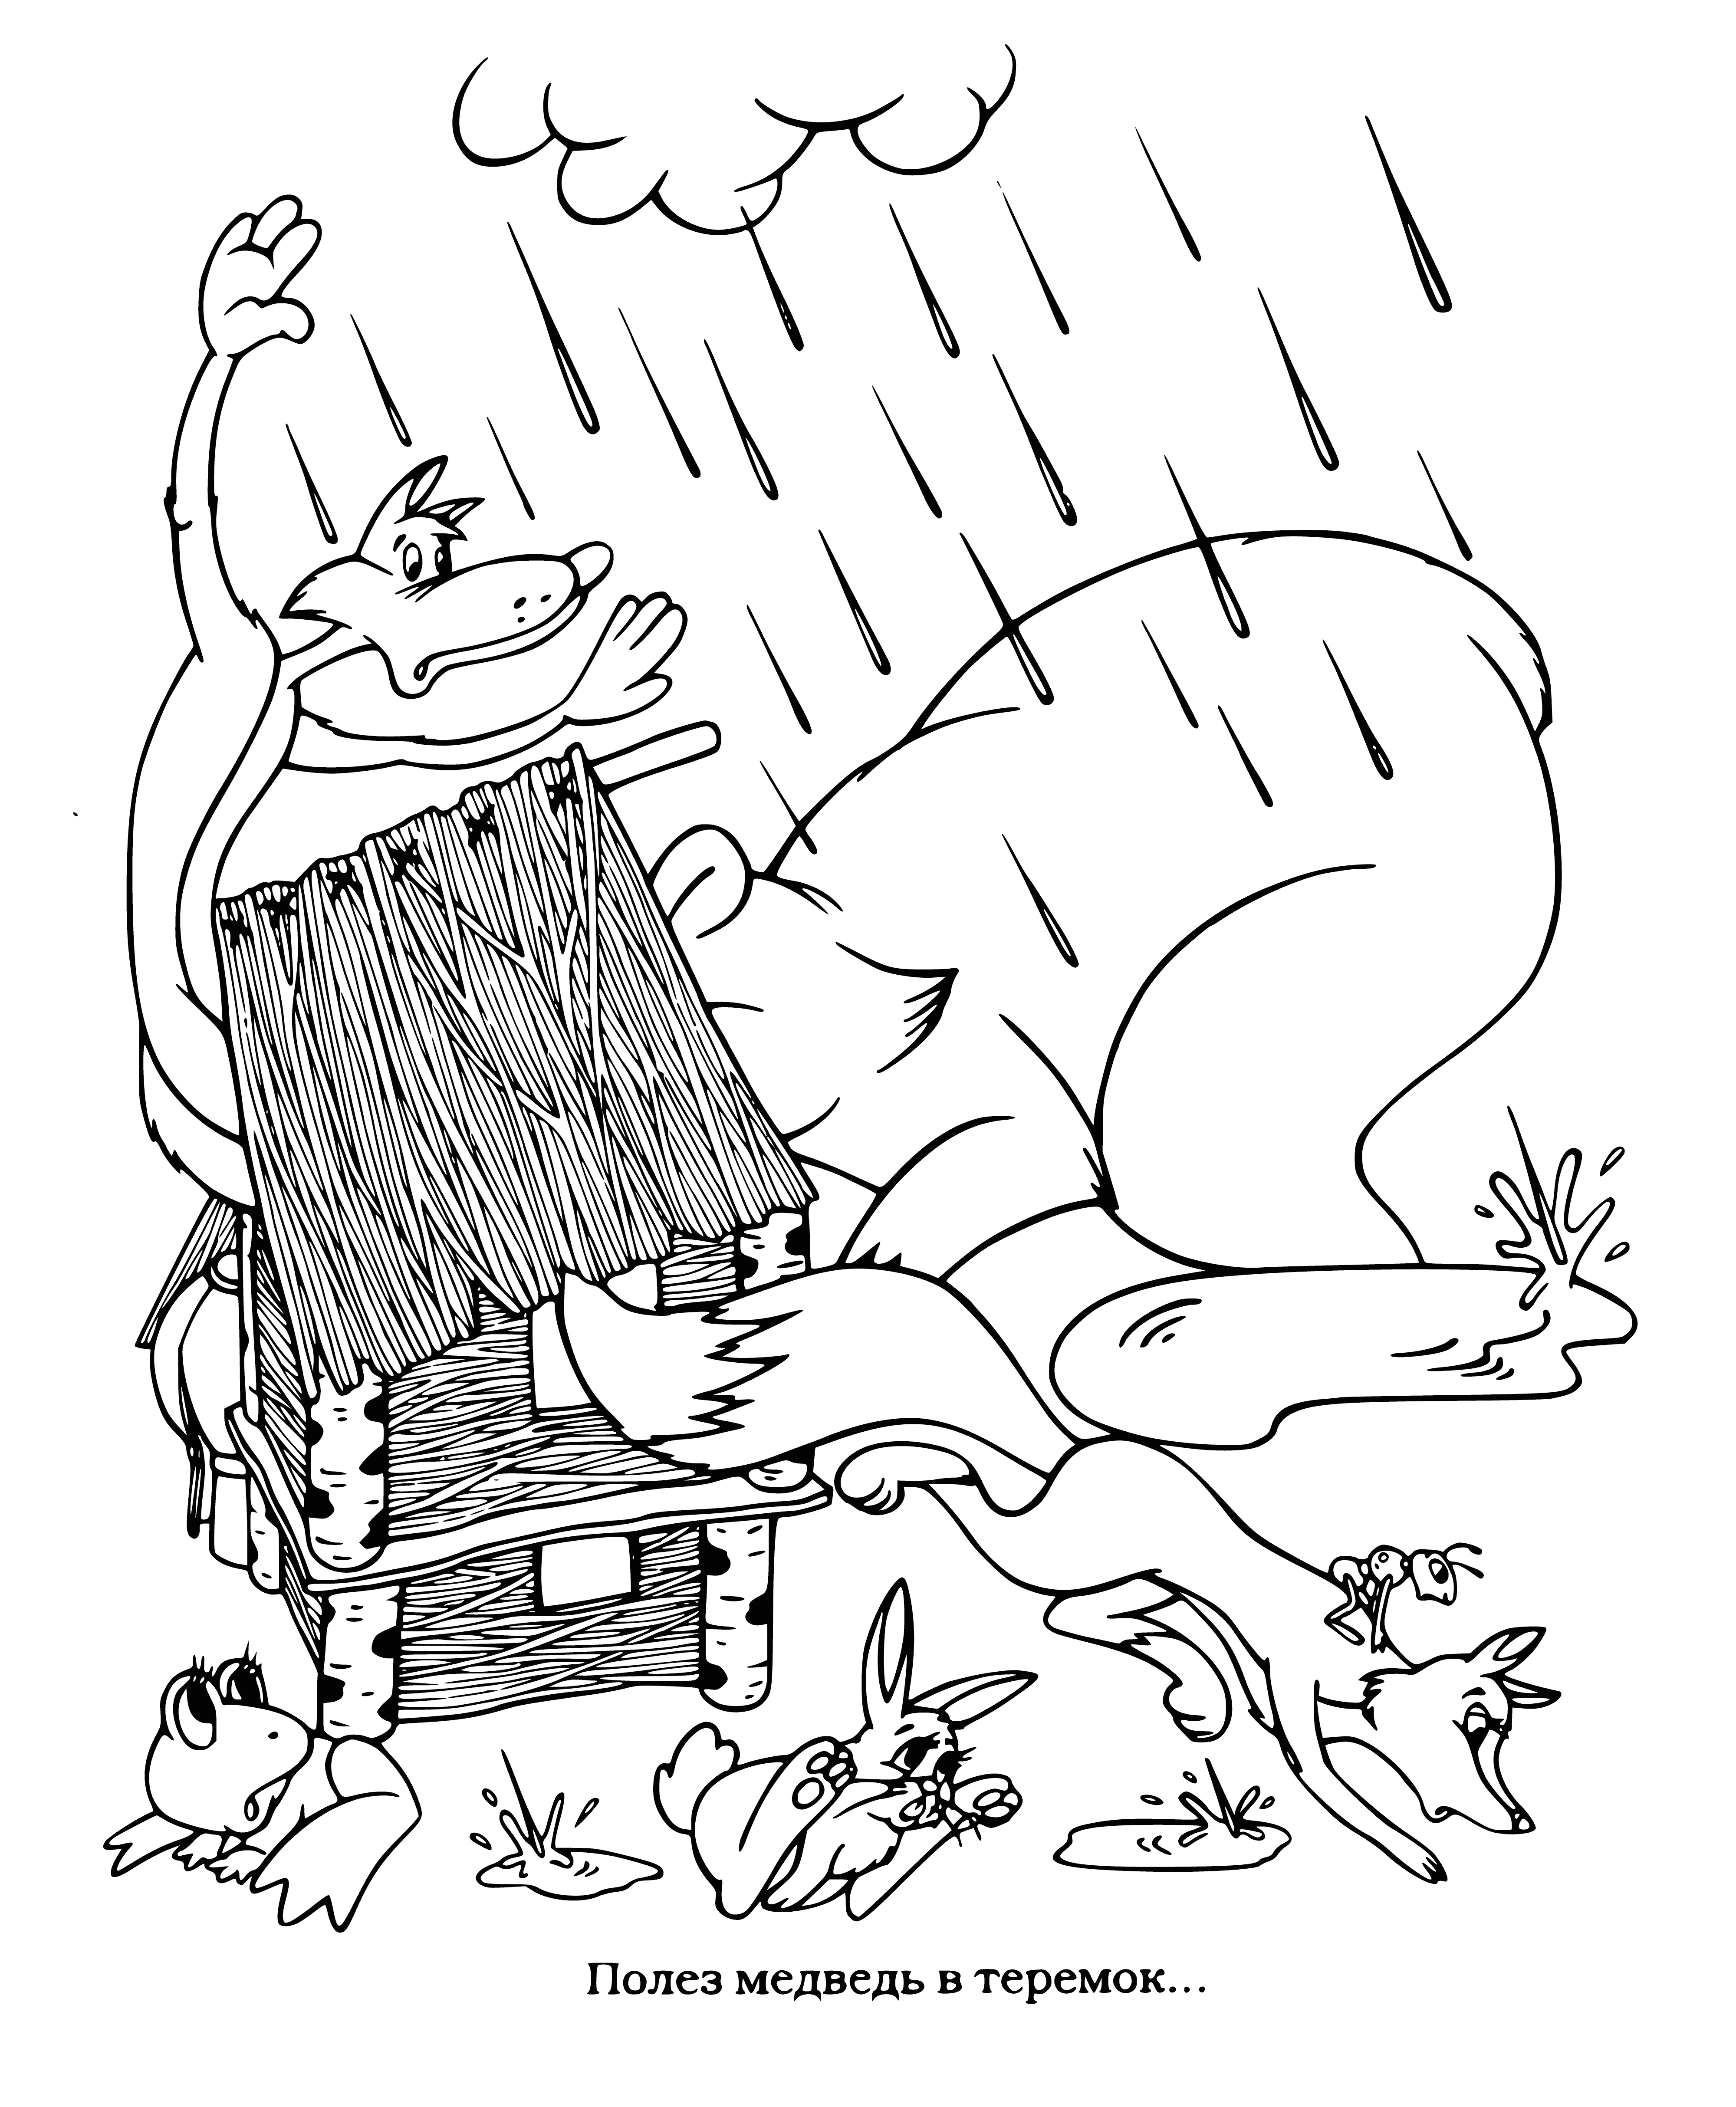 The bear climbs coloring page